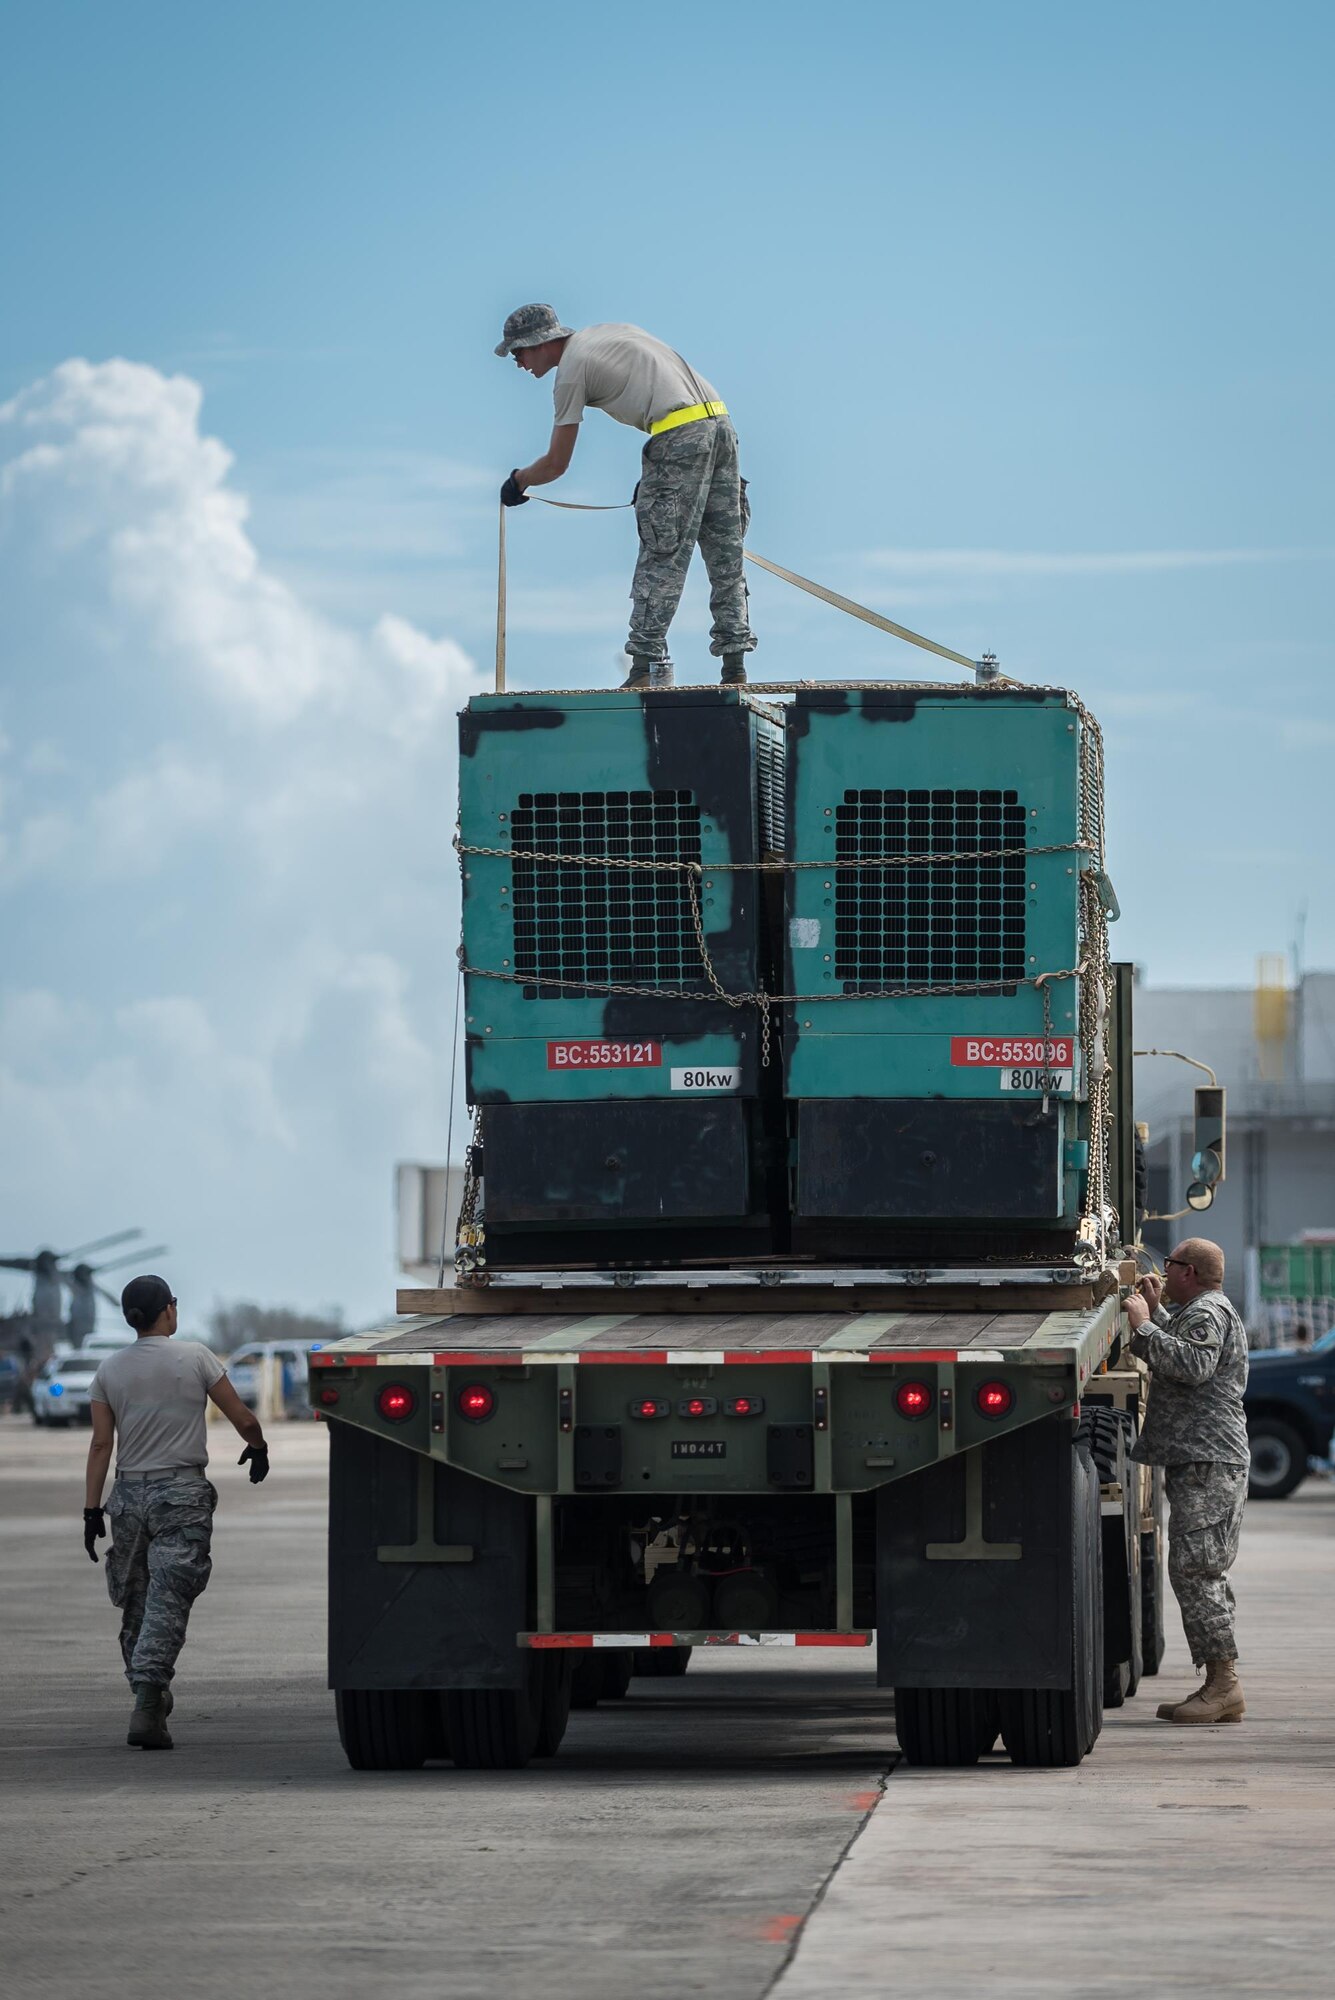 An aerial porter from the Nevada Air National Guard straps an electric generator to a flat-bed truck Oct. 7, 2017, at Luis Muñoz Marín International Airport in San Juan, Puerto Rico. The generator will be used to assist with relief operations on the island following Hurricane Maria. (U.S. Air National Guard photo by Lt. Col. Dale Greer)